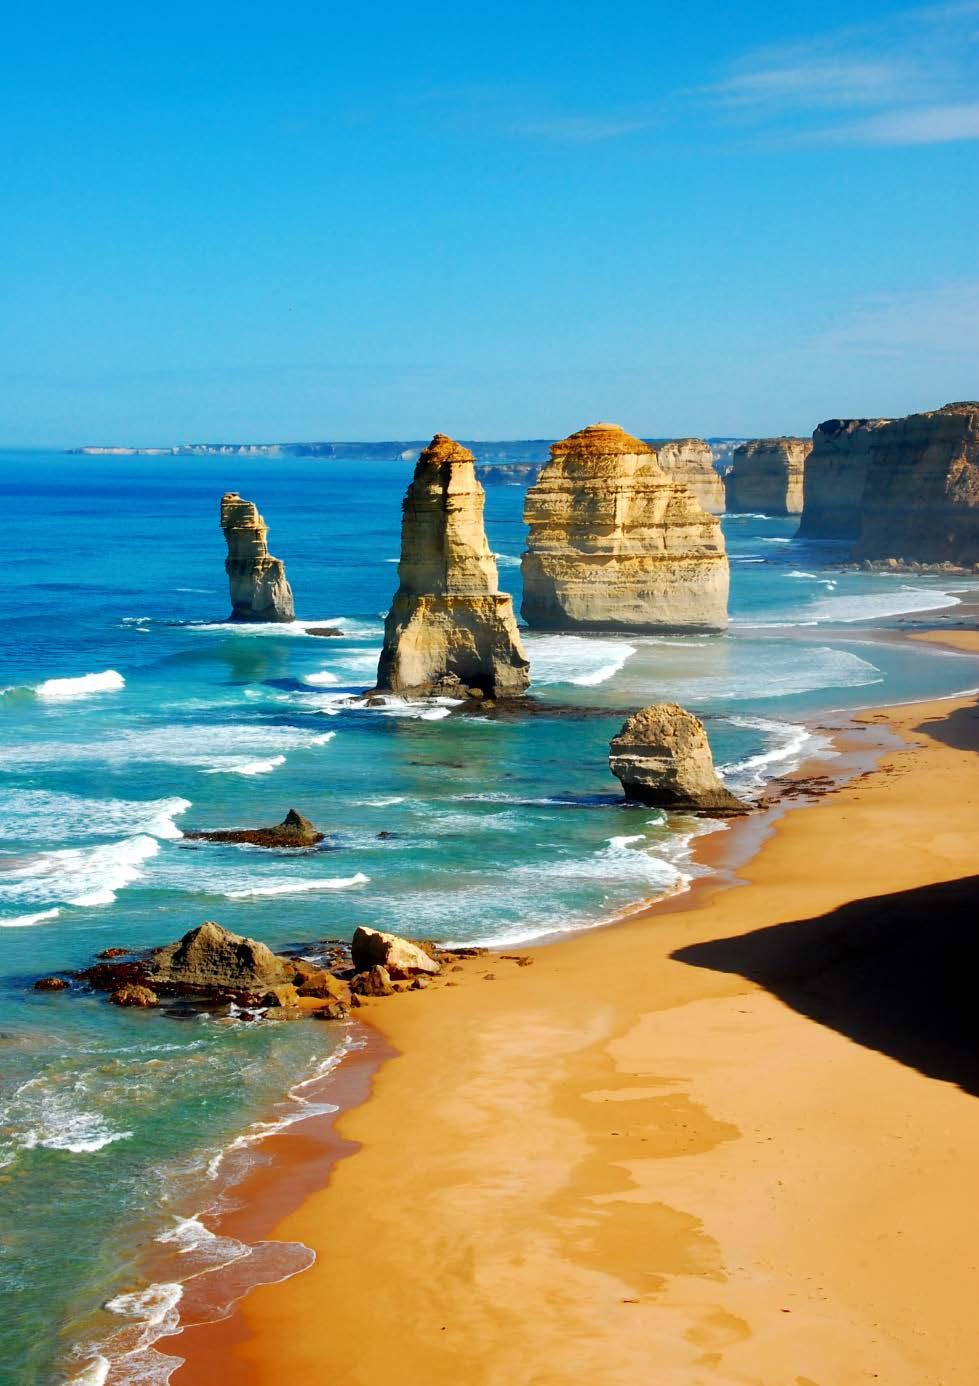 40 The Twelve Apostles CITY & REGIONAL 2 Short Breaks & 30 Day Tours to choose from: Whether the city, beach, or bush is your thing, we have a Short Break for you.